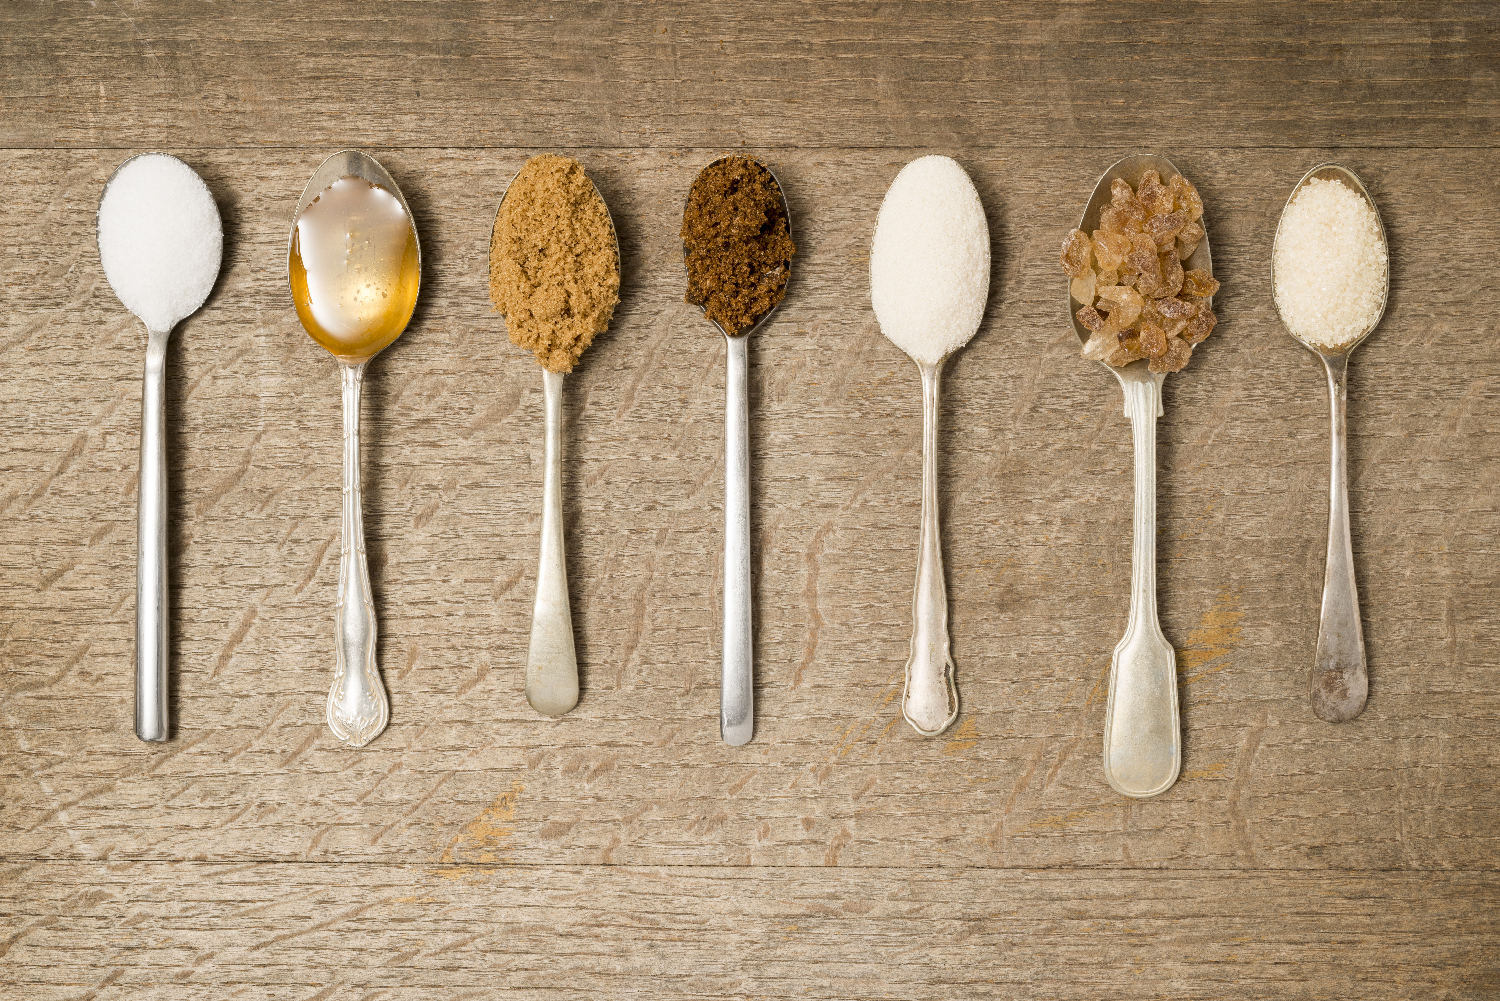 Added Sugars: 5 Practical Tips to Spot Them